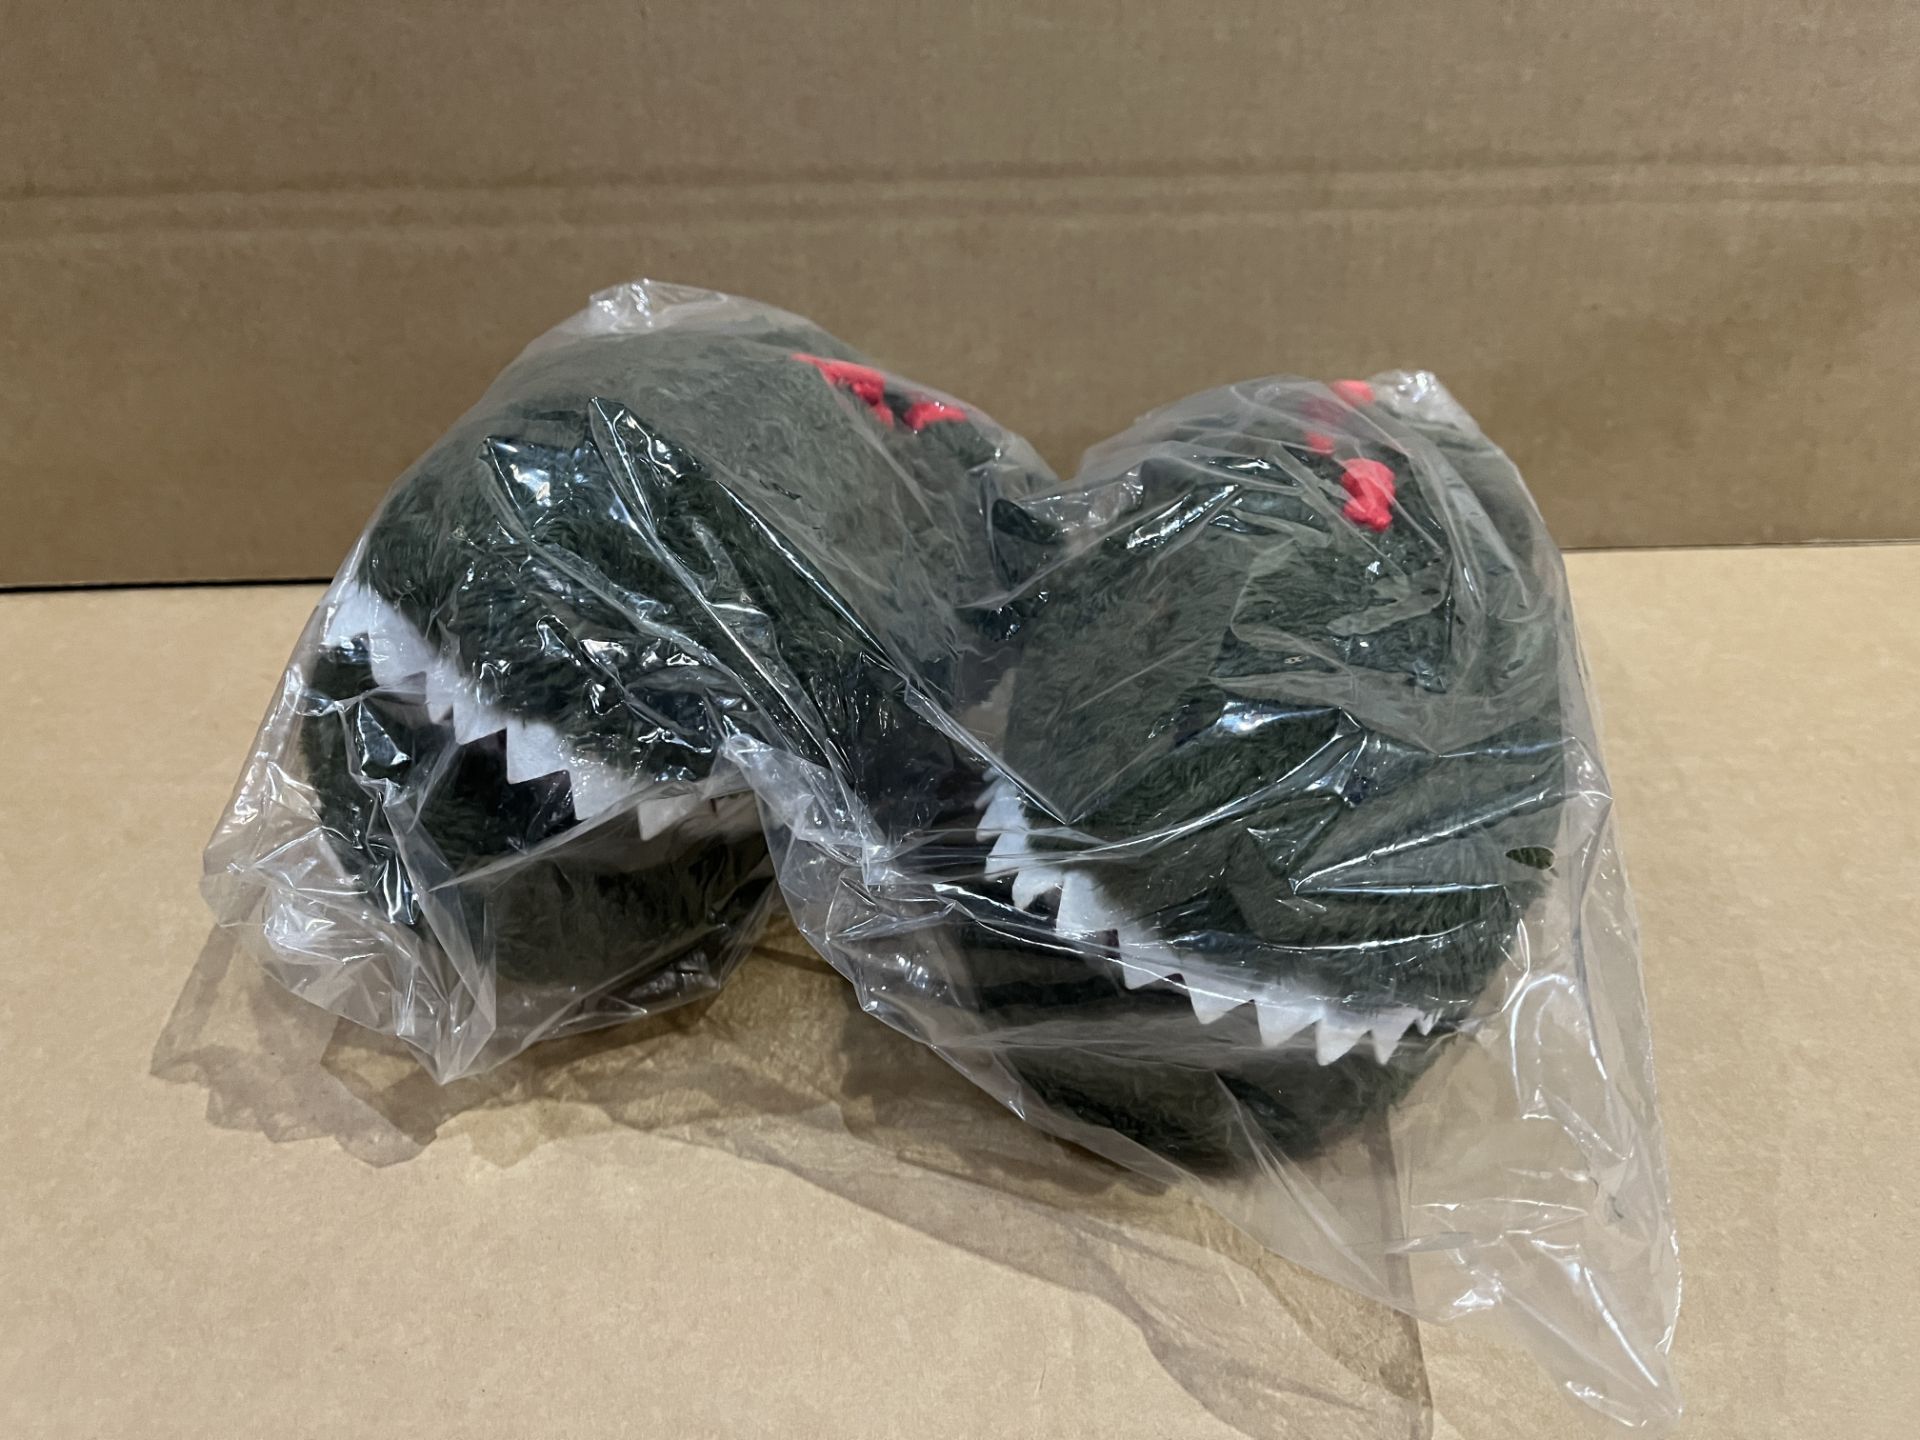 20 X BRAND NEW TOTES DINOSAUR SLIPPERS (SIZES MAY VARY) R9